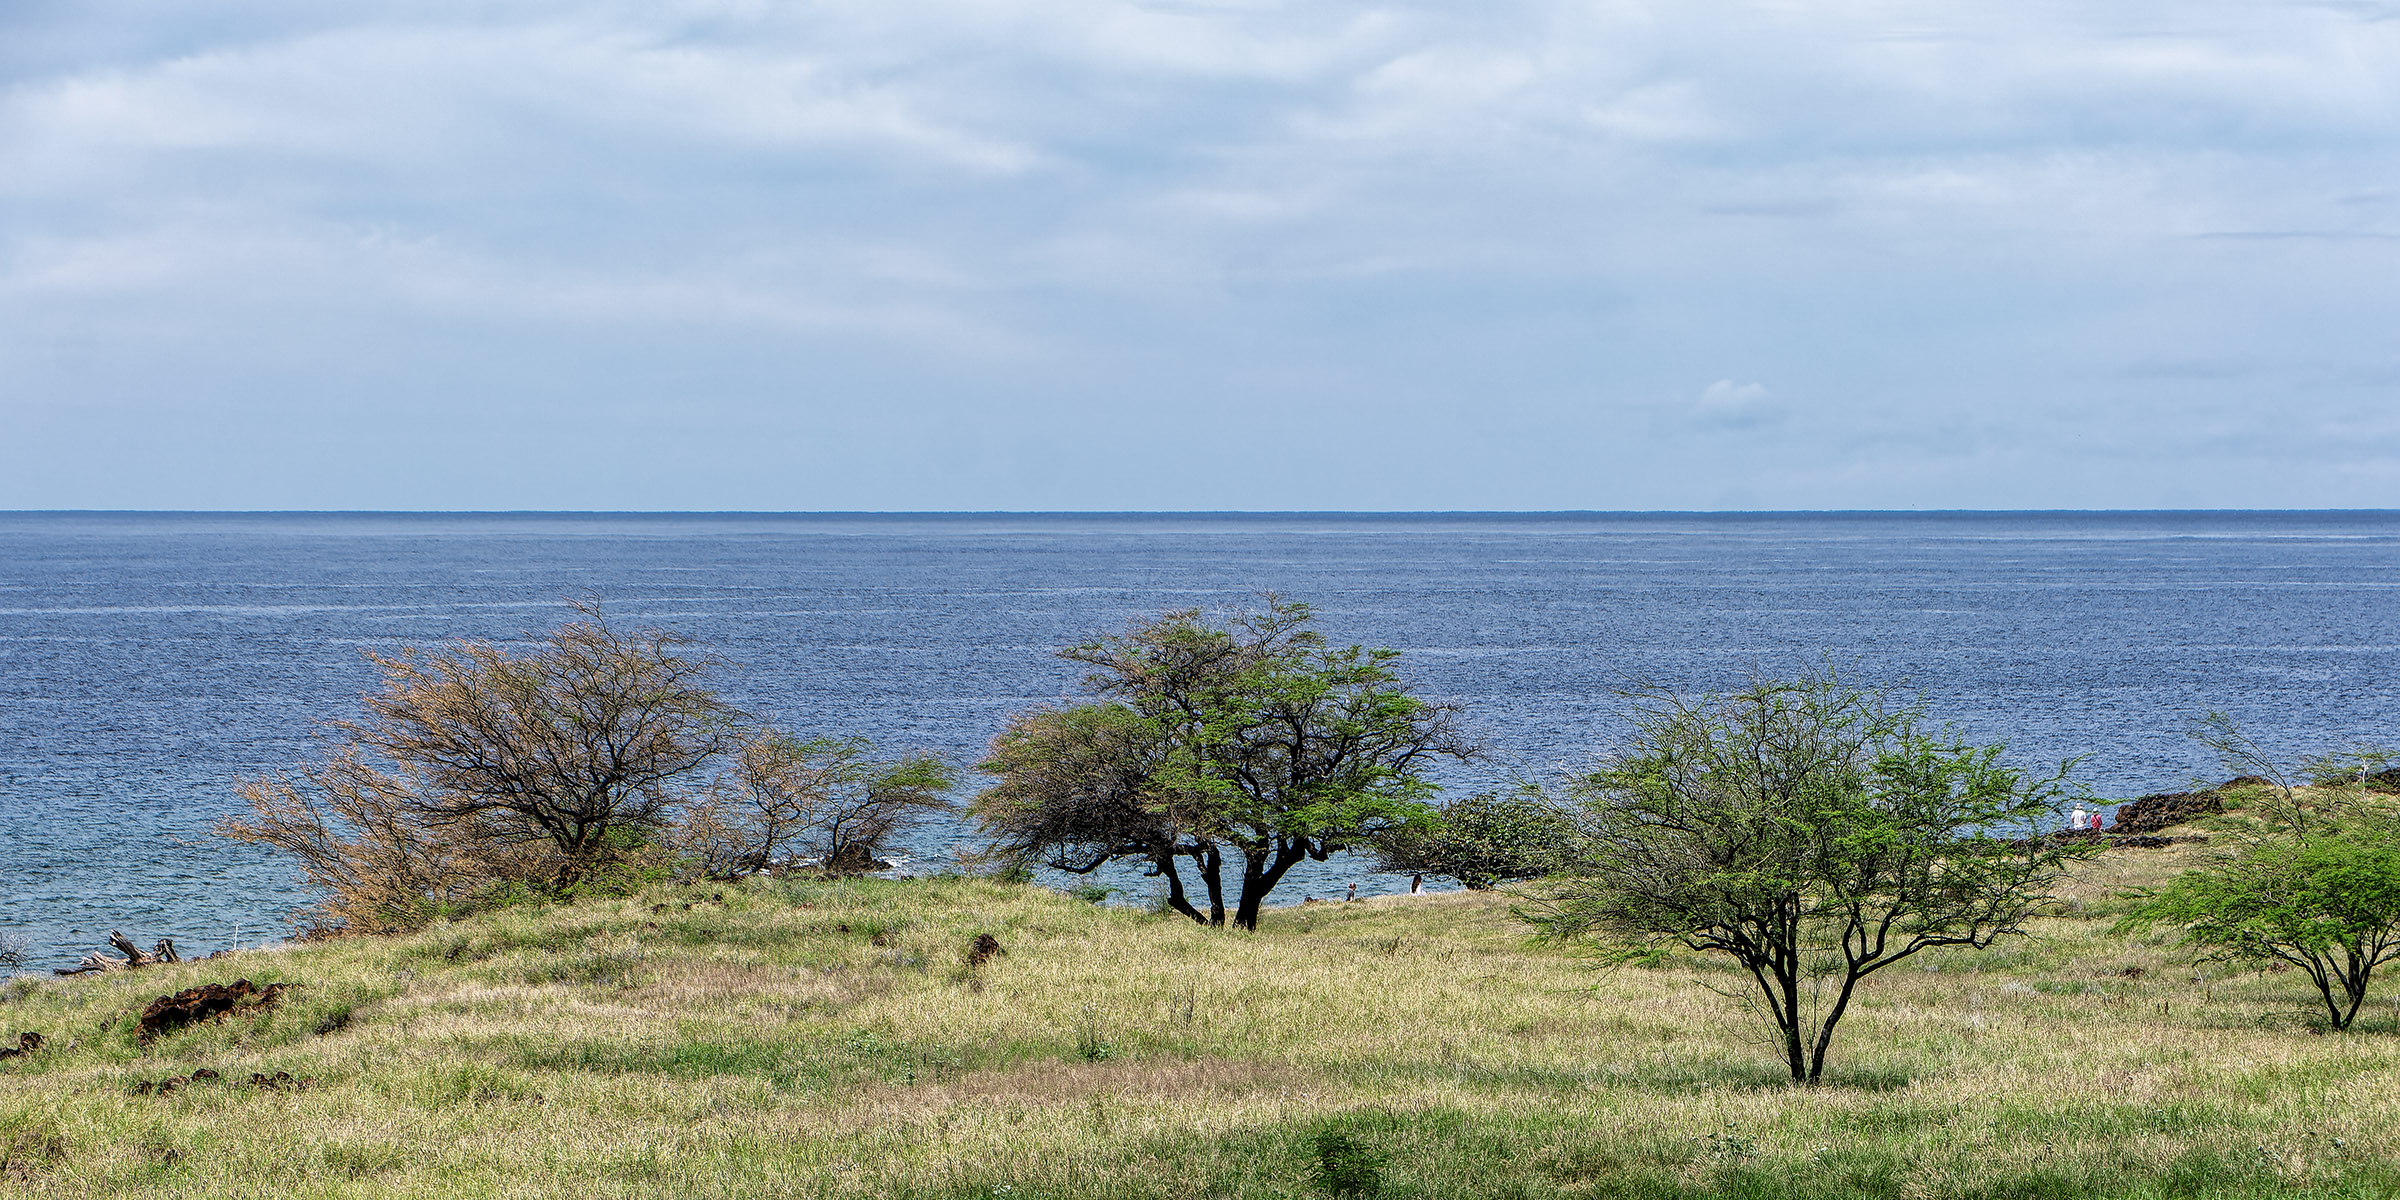 The view from Lapakahi State Historical Park, site of an ancient fishing village